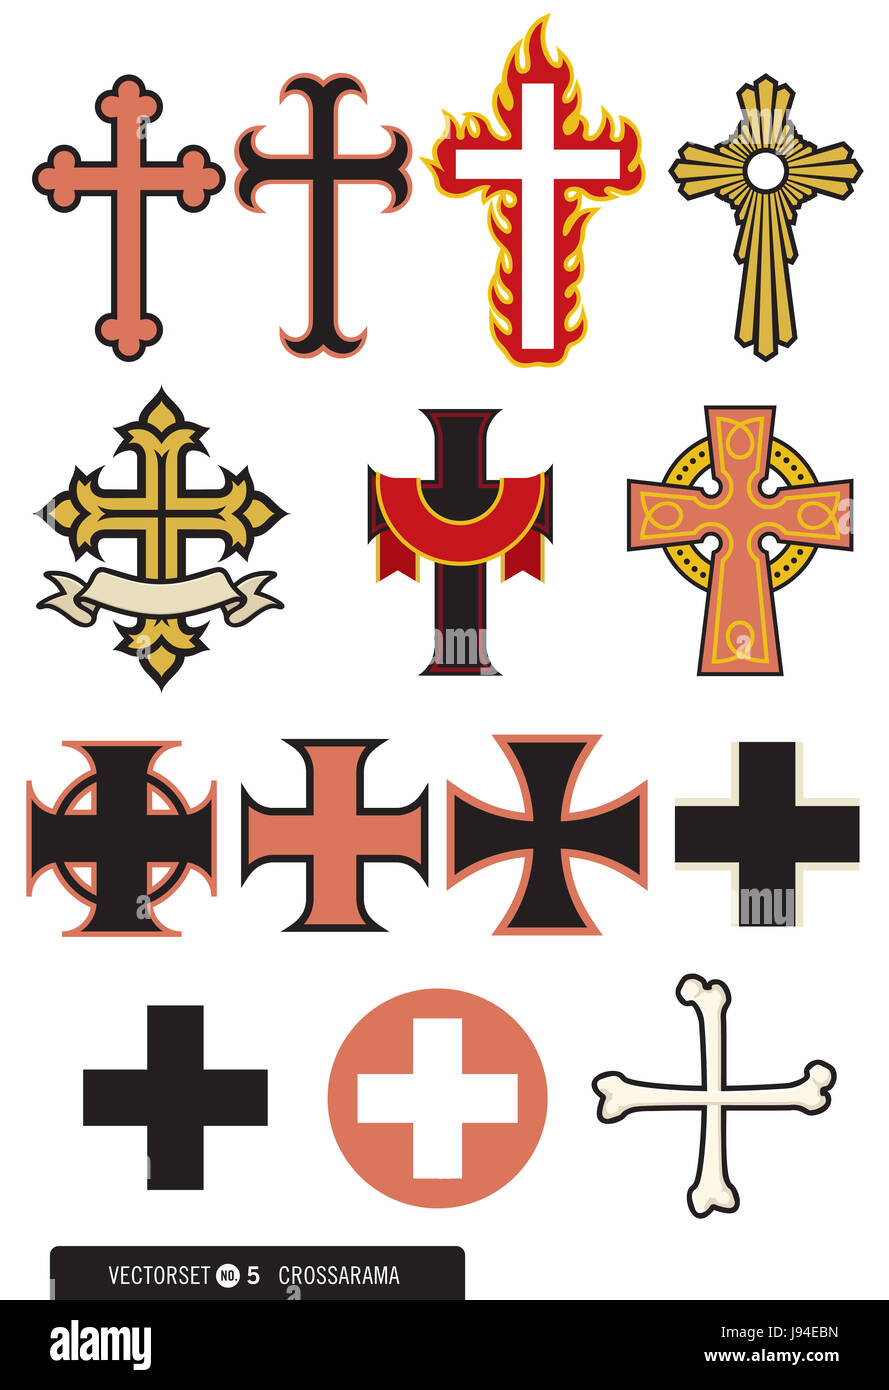 ⲕⲁⲣⲟⲗ on Twitter The history and significance of the Coptic cross tattoo    httpstcoPC3DgHQi4y  Twitter